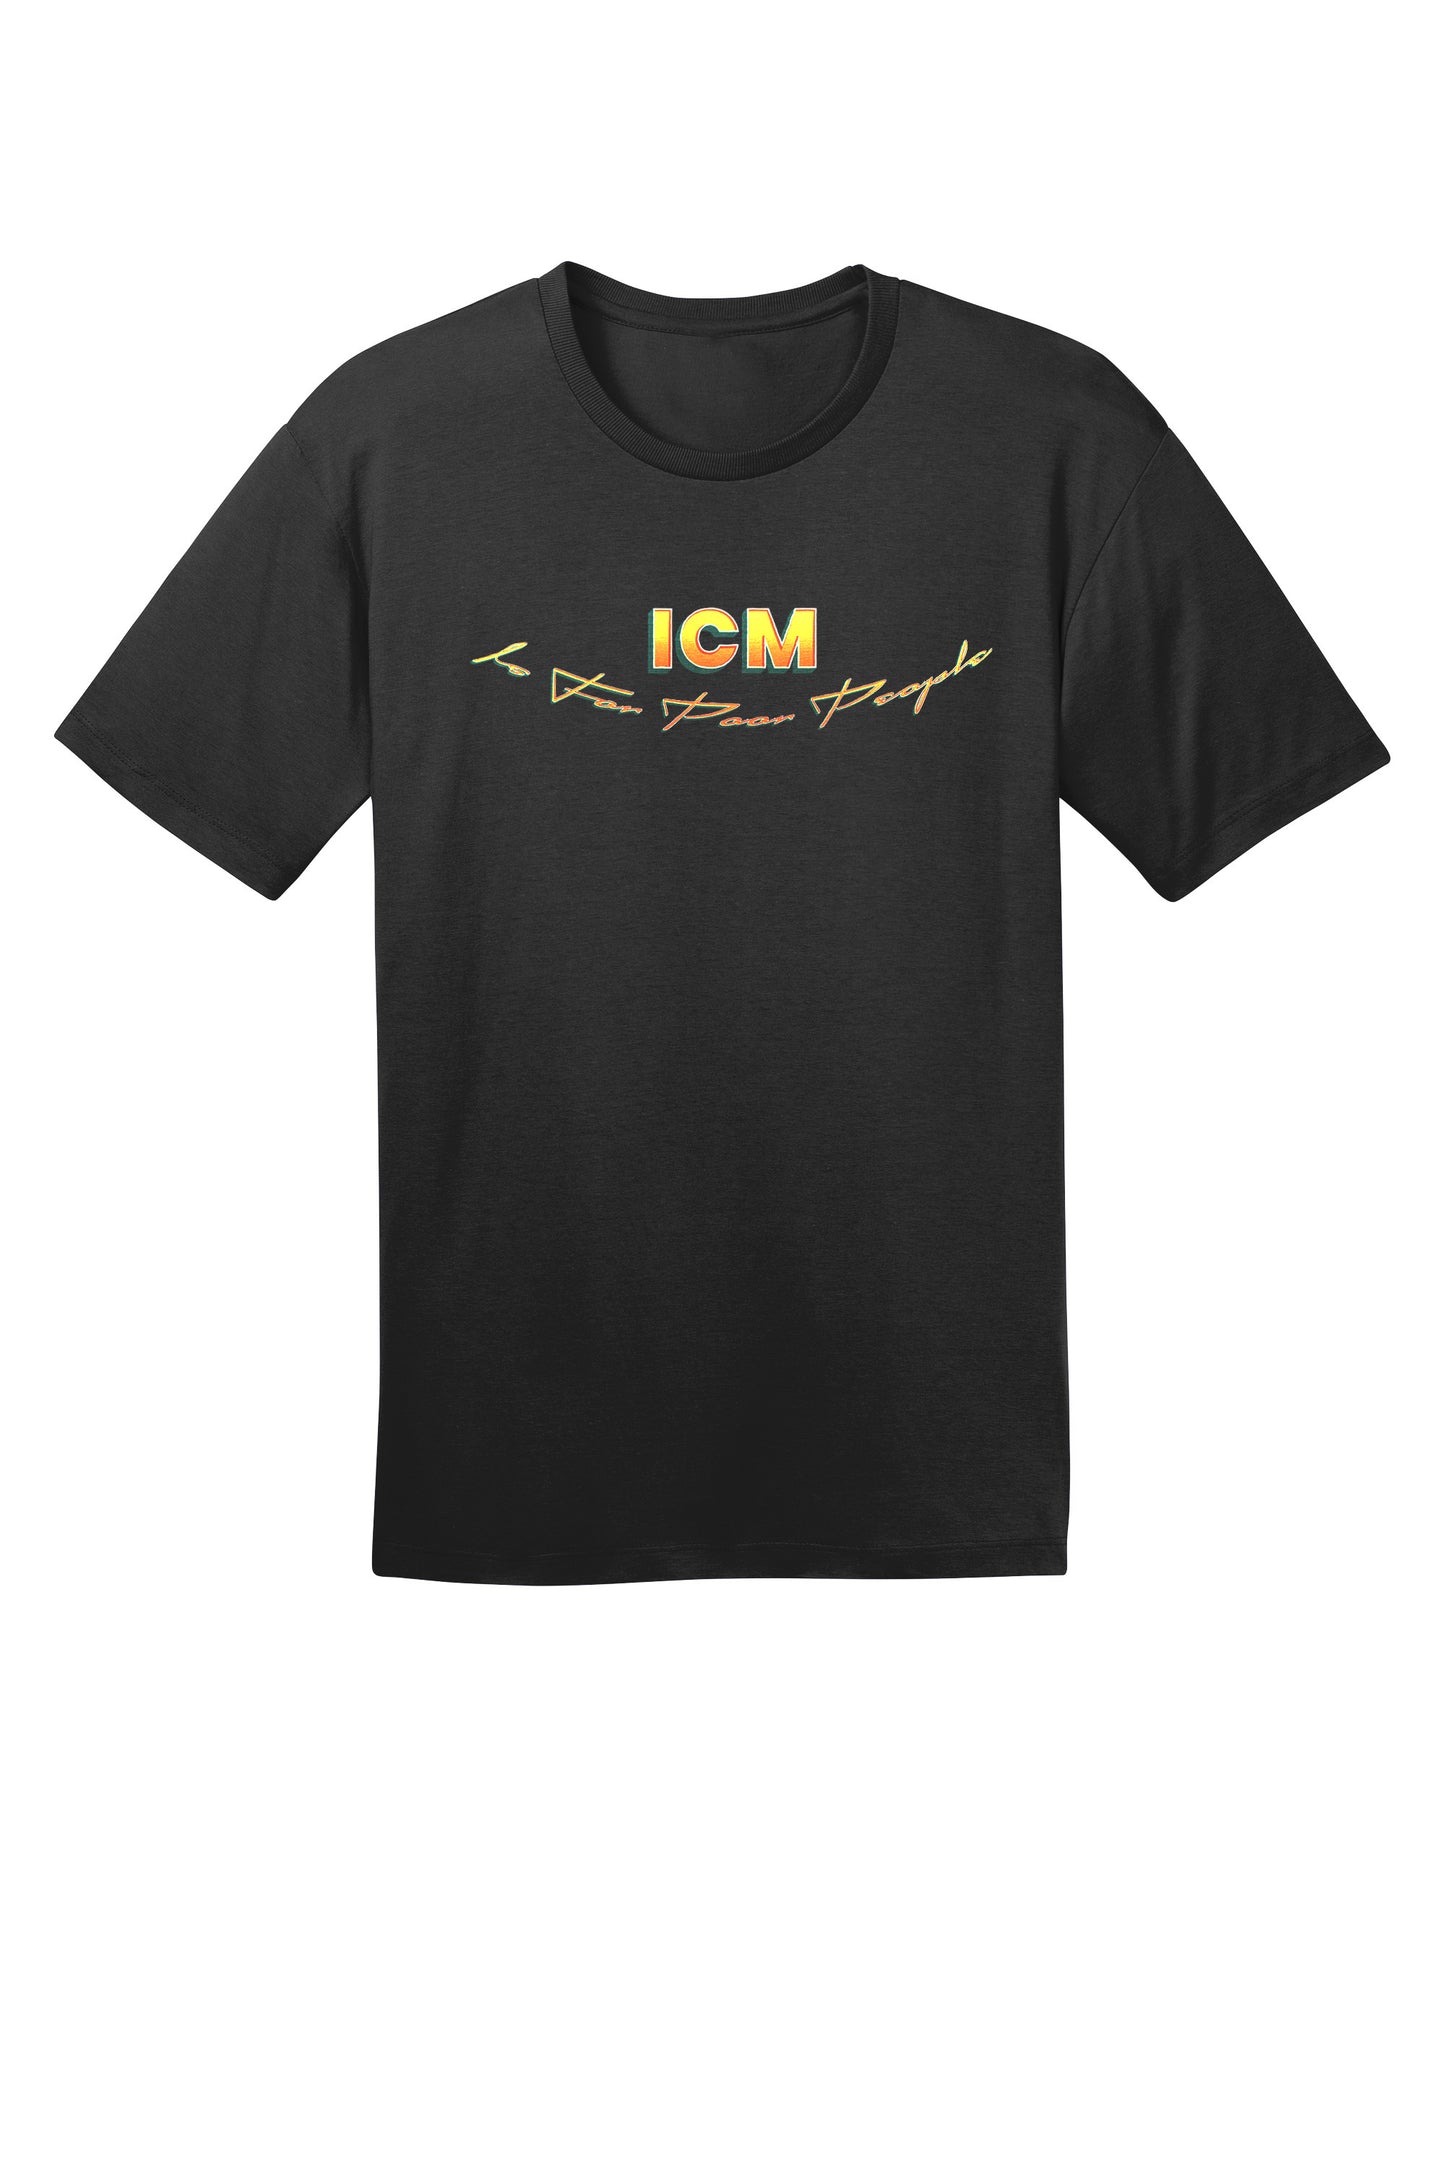 ICM IS FOR POOR PEOPLE Tee